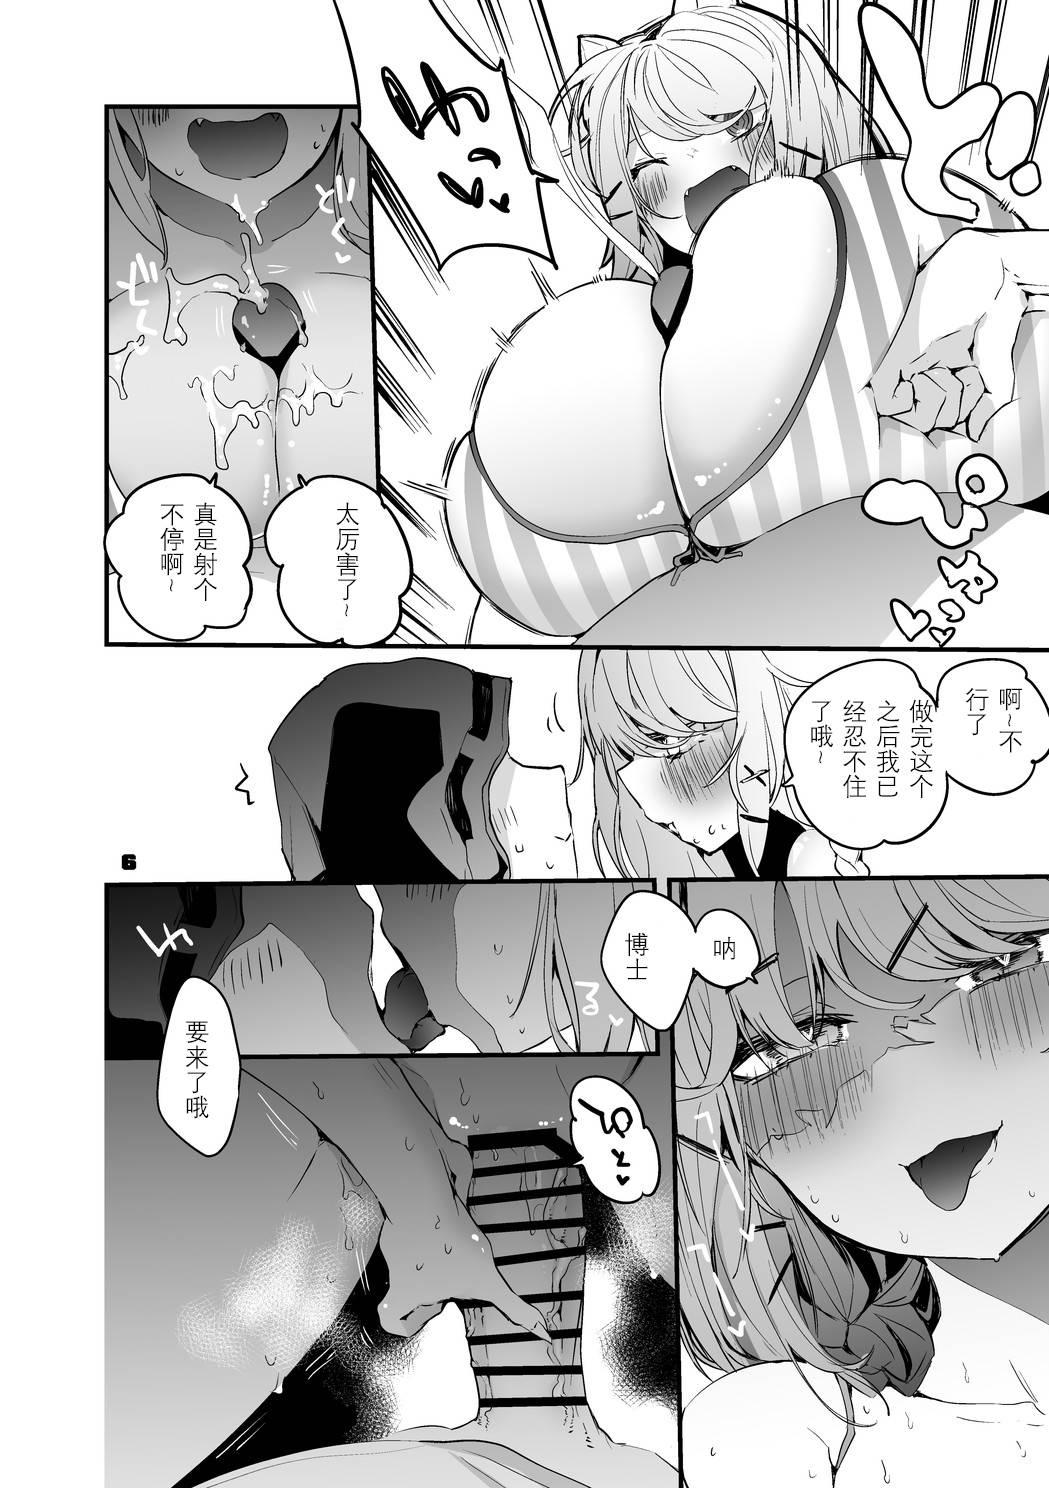 Sex Pussy Hakobune x Ero x Matome Hon 2 Ch. 1-2, 7 | りんごくらぶ的方舟x工口x总集篇 - Arknights Spandex - Page 6